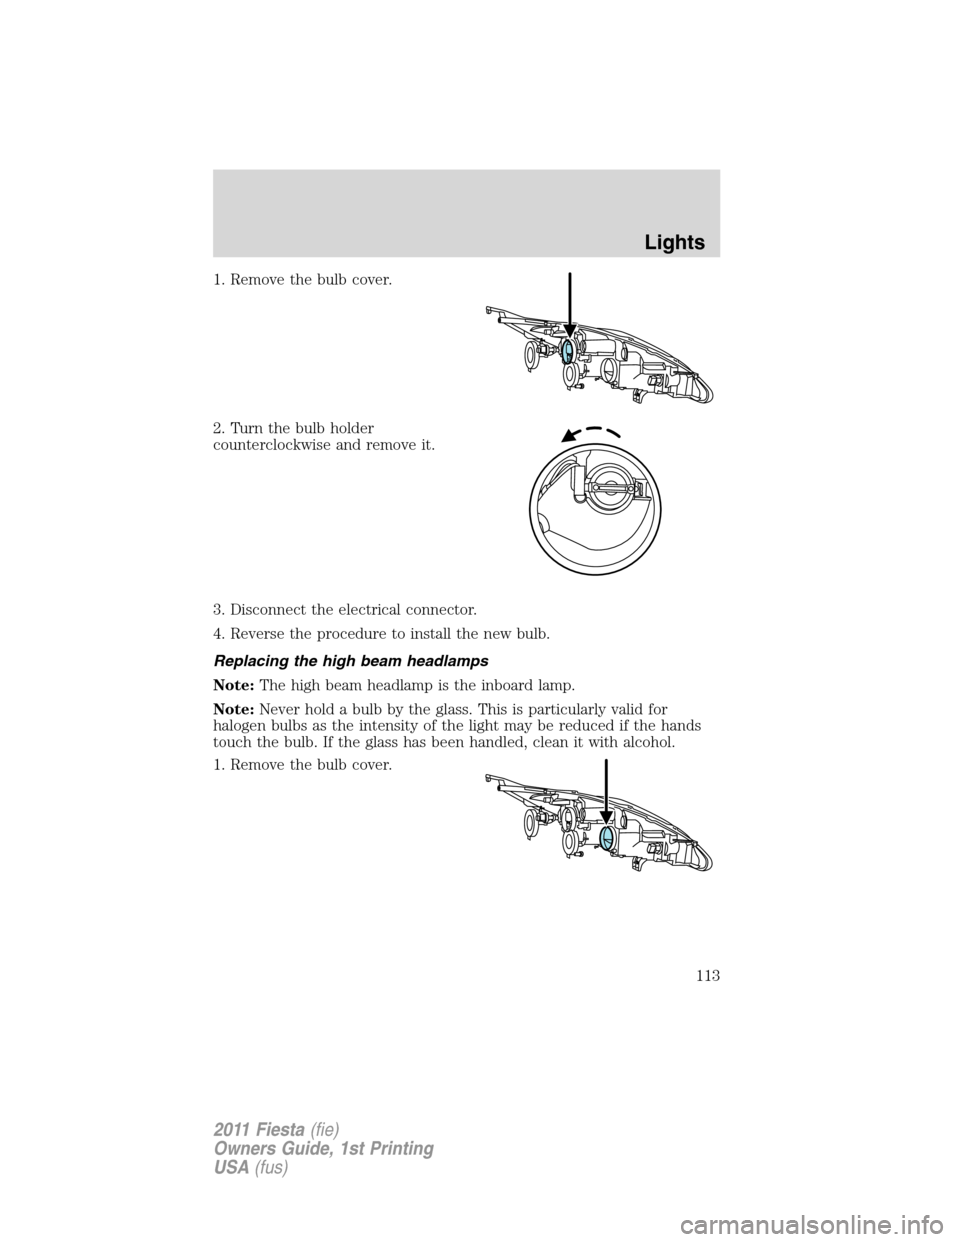 FORD FIESTA 2011 6.G Owners Manual 1. Remove the bulb cover.
2. Turn the bulb holder
counterclockwise and remove it.
3. Disconnect the electrical connector.
4. Reverse the procedure to install the new bulb.
Replacing the high beam head